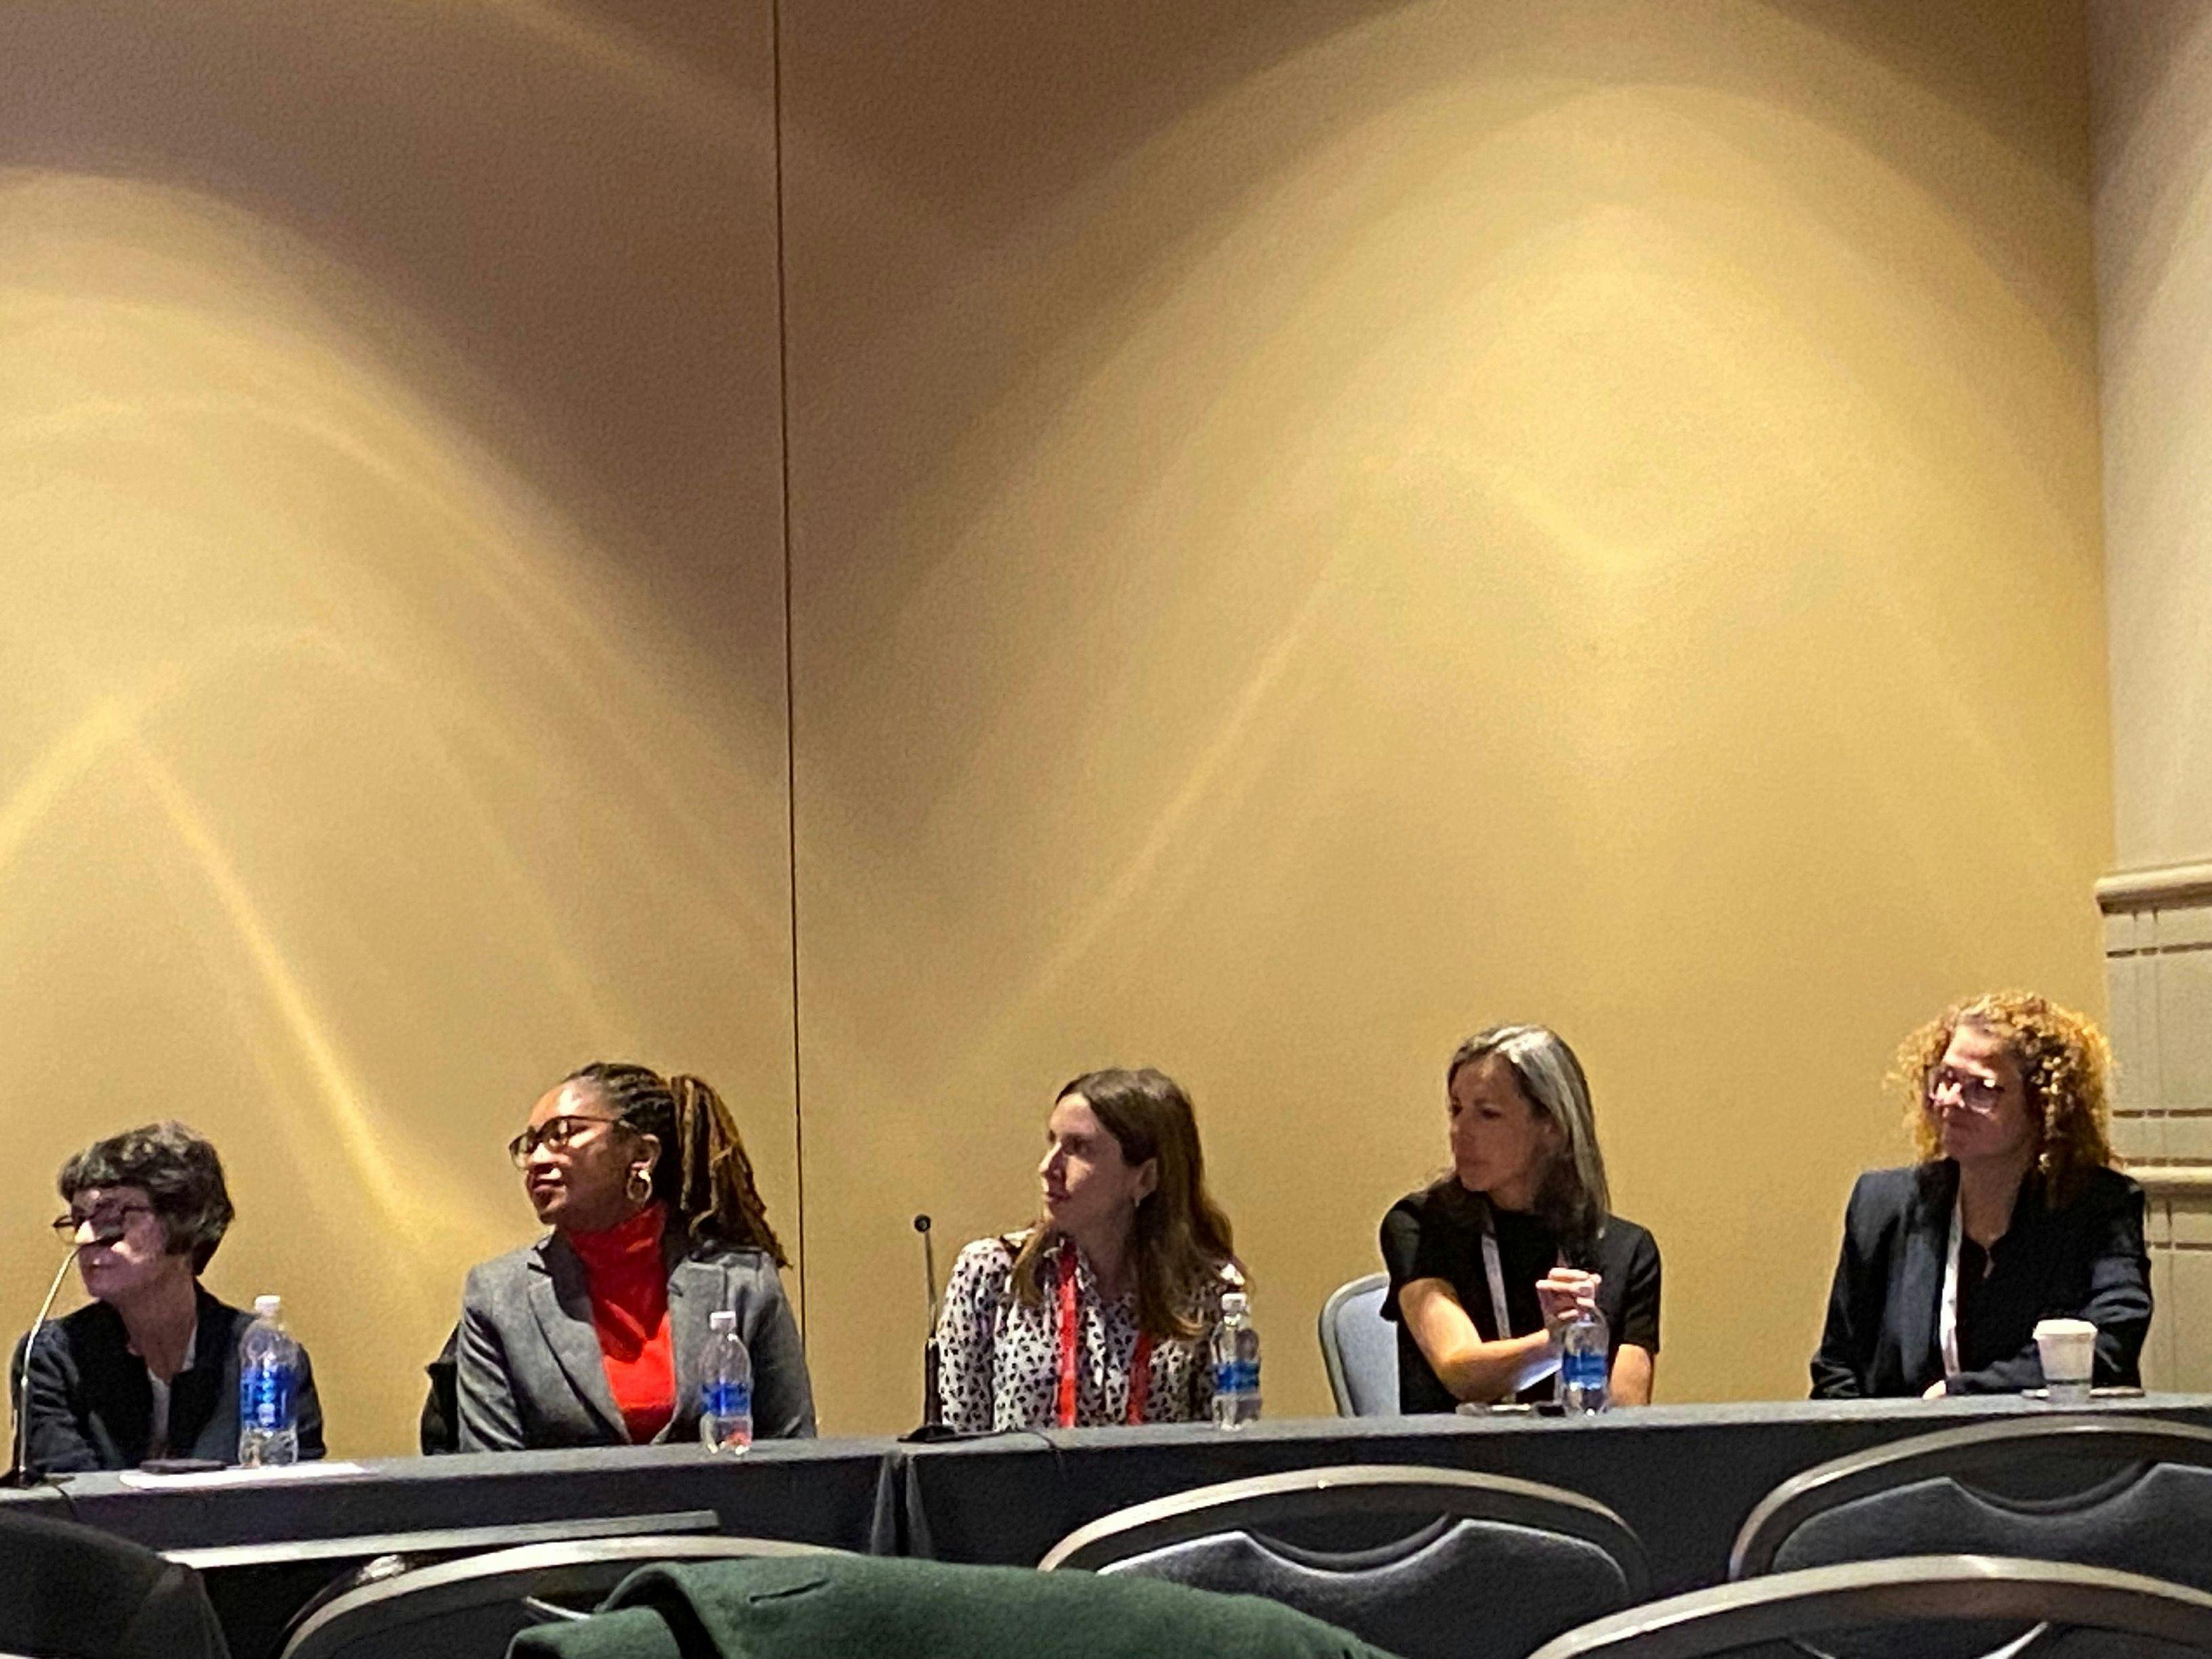 Several researchers discussed the role that stress plays in cardiovascular disease among women during a session at the American Heart Association Scientific Sessions in Philadelphia Saturday. (Photo: Ron Southwick)